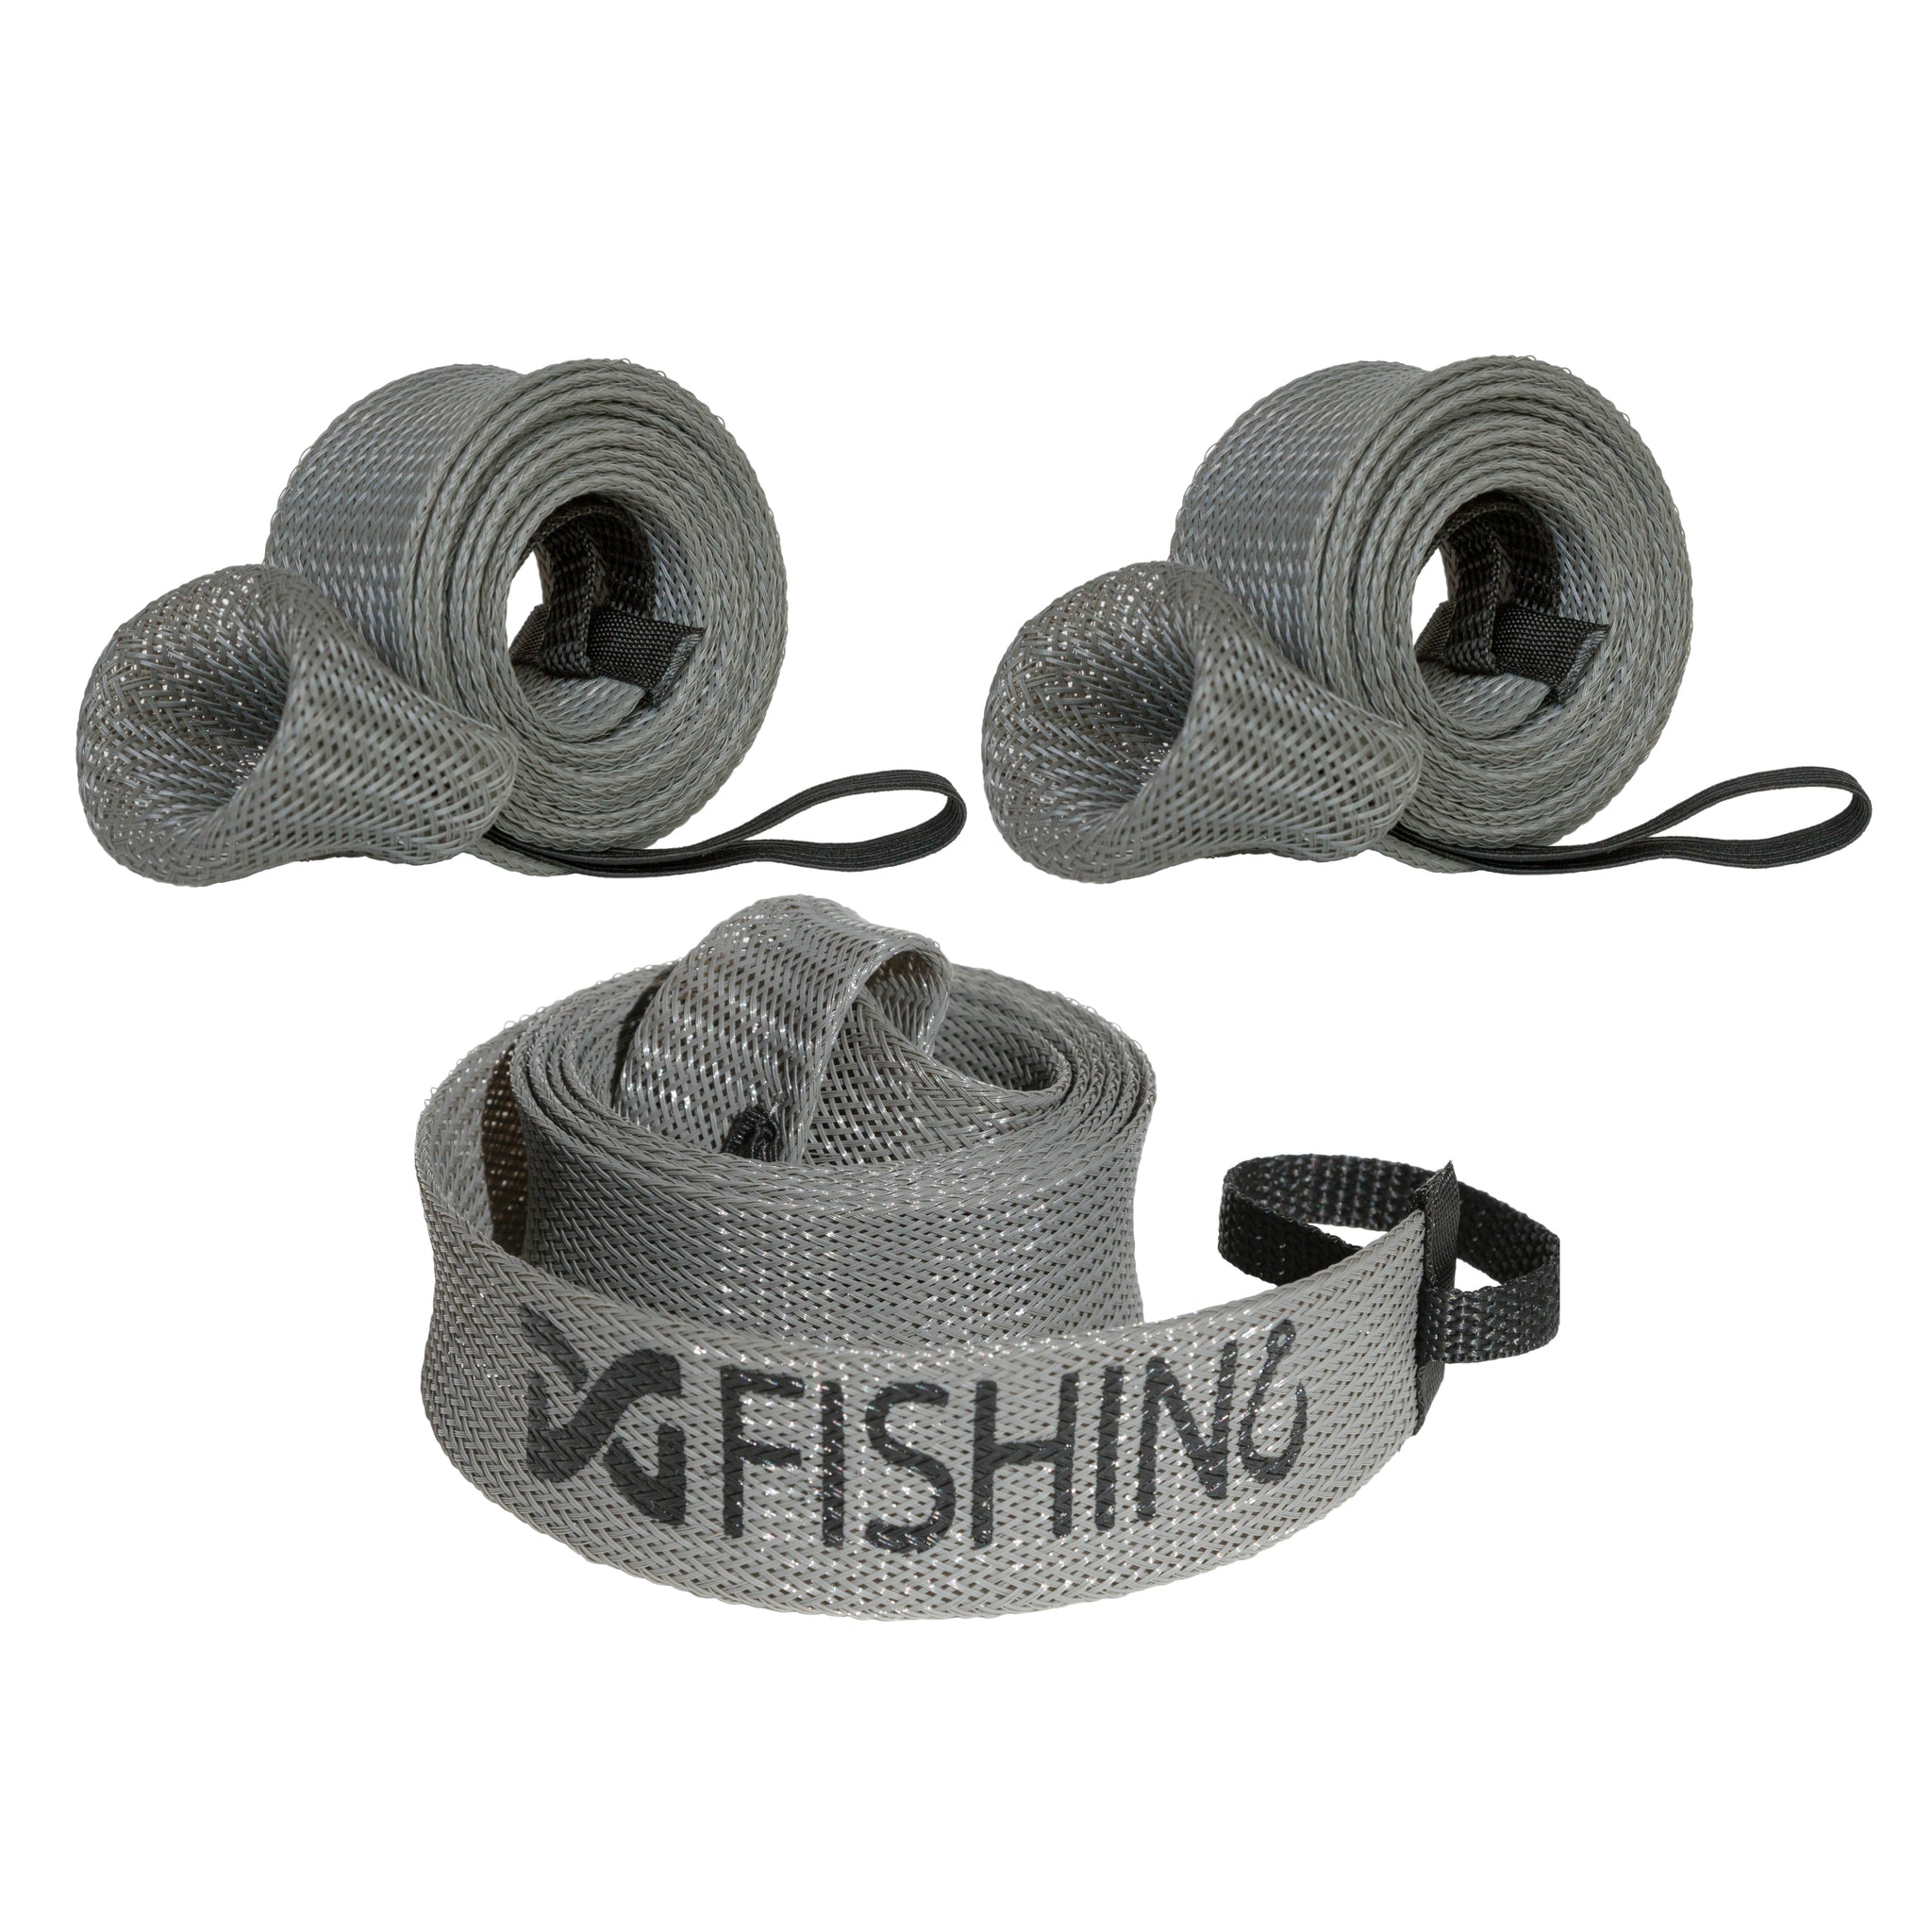 Premium 10ft–14ft Fishing Rod Sleeves from Rod Armour